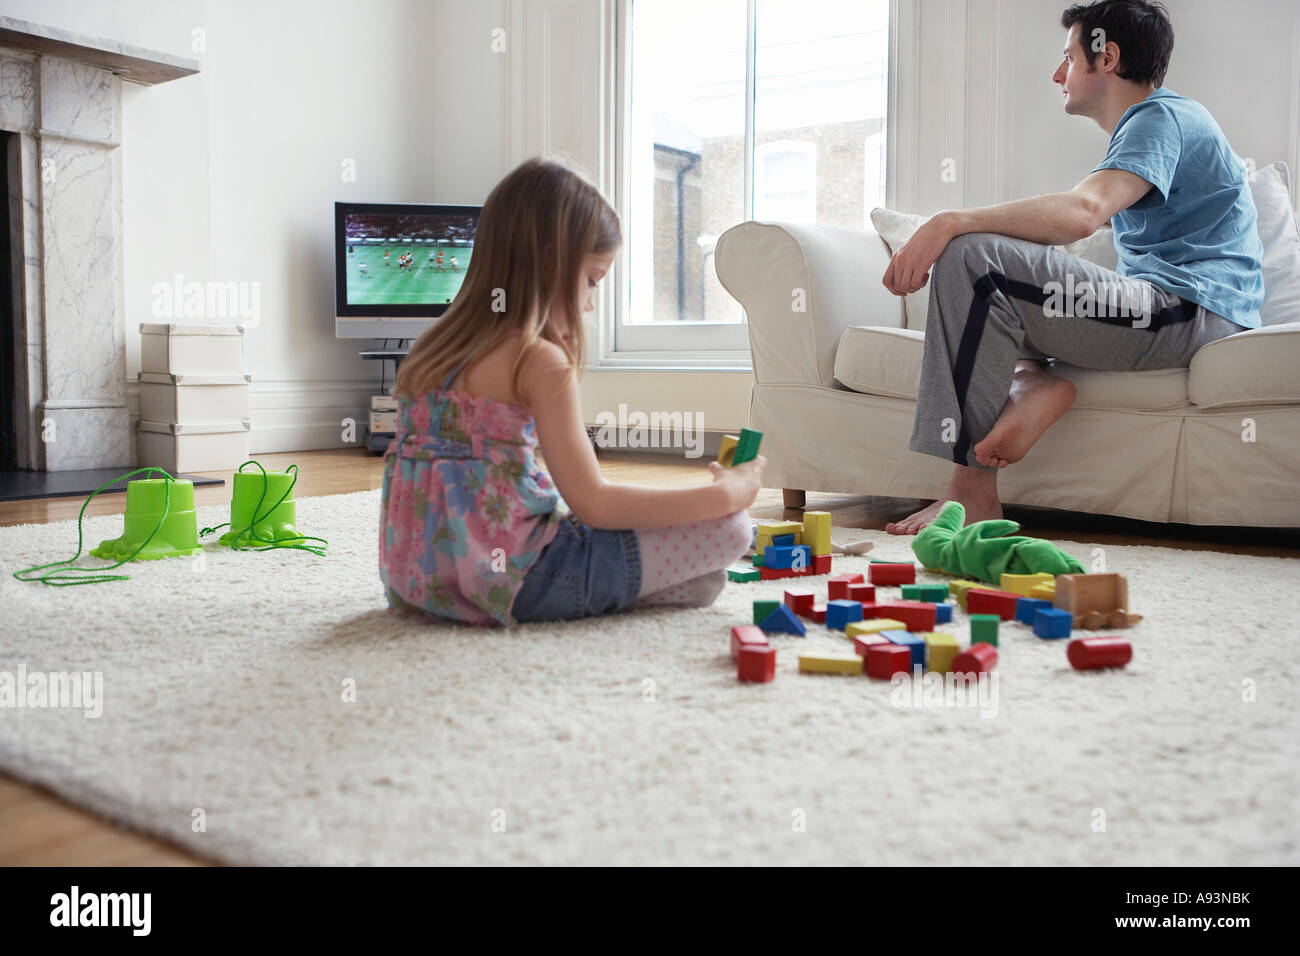 Girl (5-6) sitting on floor, playing with blocks, father watching television Stock Photo